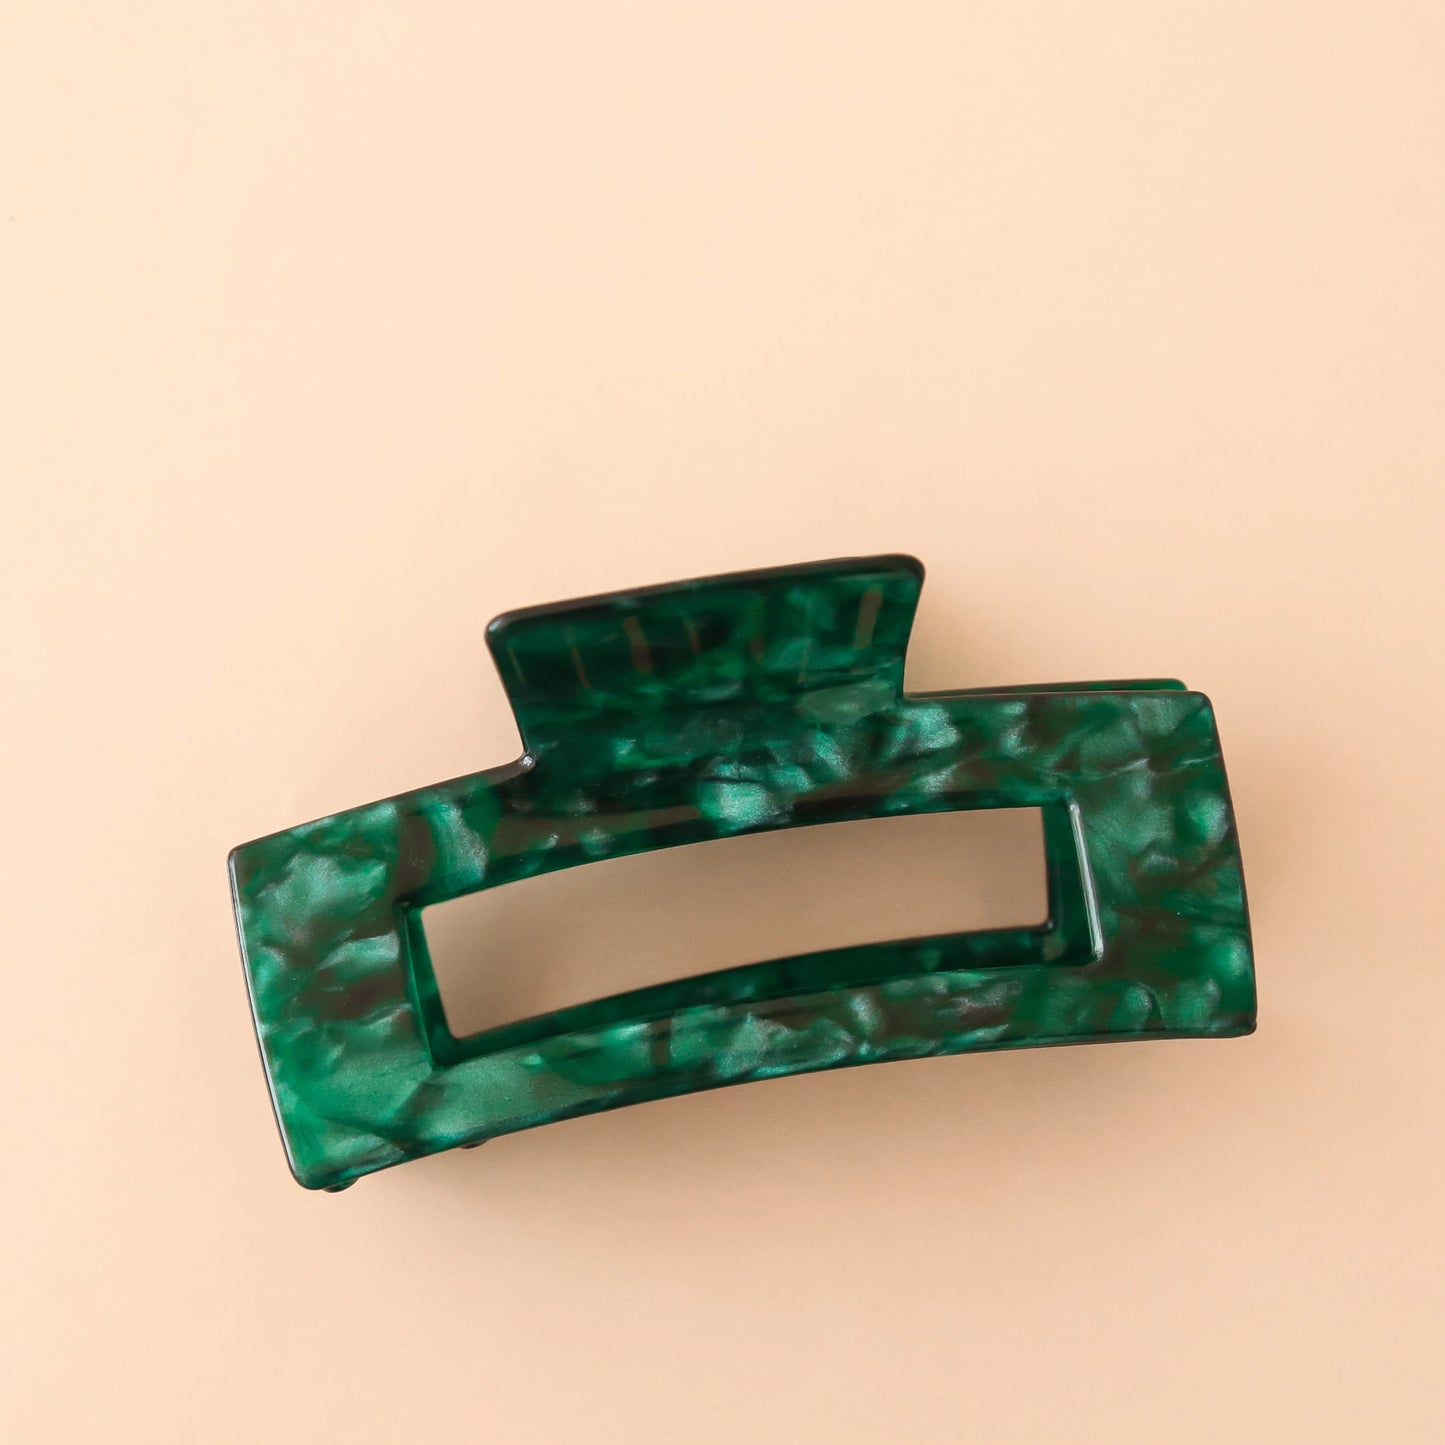 On a peachy background is a rectangular shaped claw clip in an emerald green shell like texture and shade.